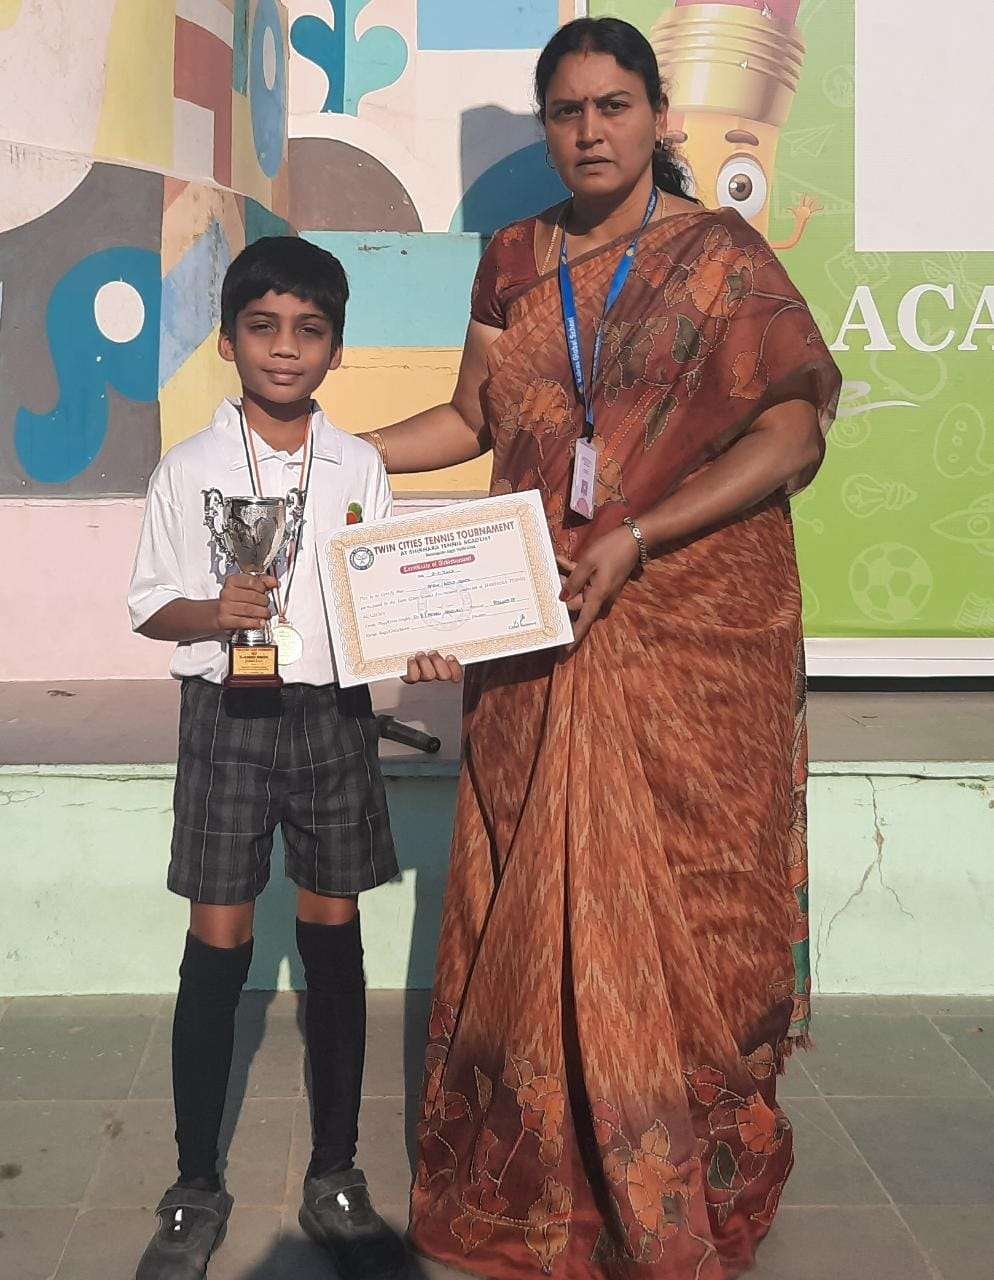 Amaan Aqib Shaik of Grade 4 has participated in the twin cities Tennis Tournament conducted at Shikara Tennis Academy in the event under-8 mixed singles and stood the runner up position.